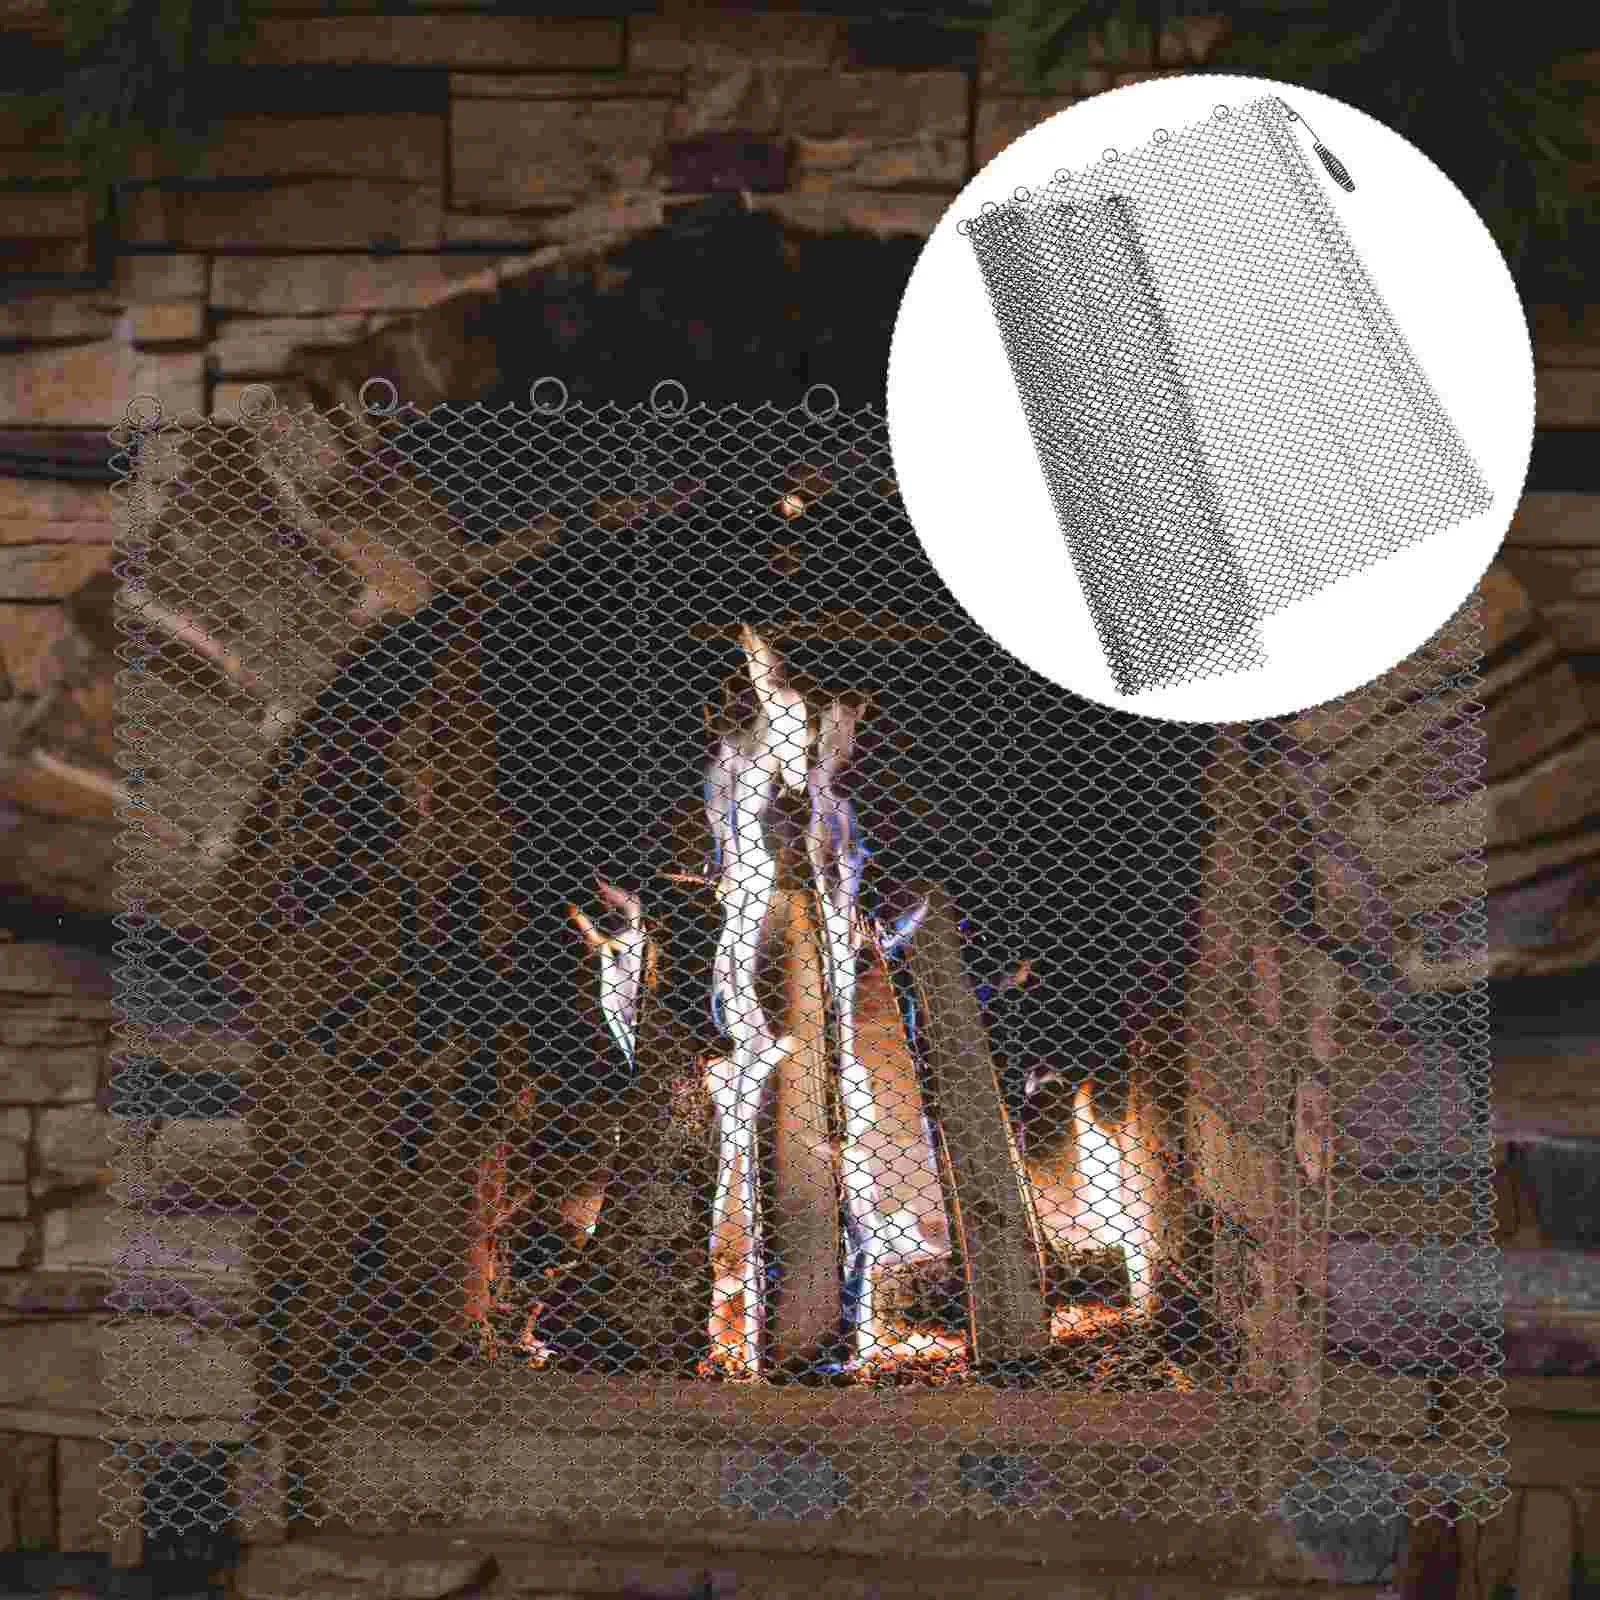 

2 Pcs Fireplace Mesh Screens Sparks Guard Hearth Curtains Outdoor Home Panel Iron Metal Stove